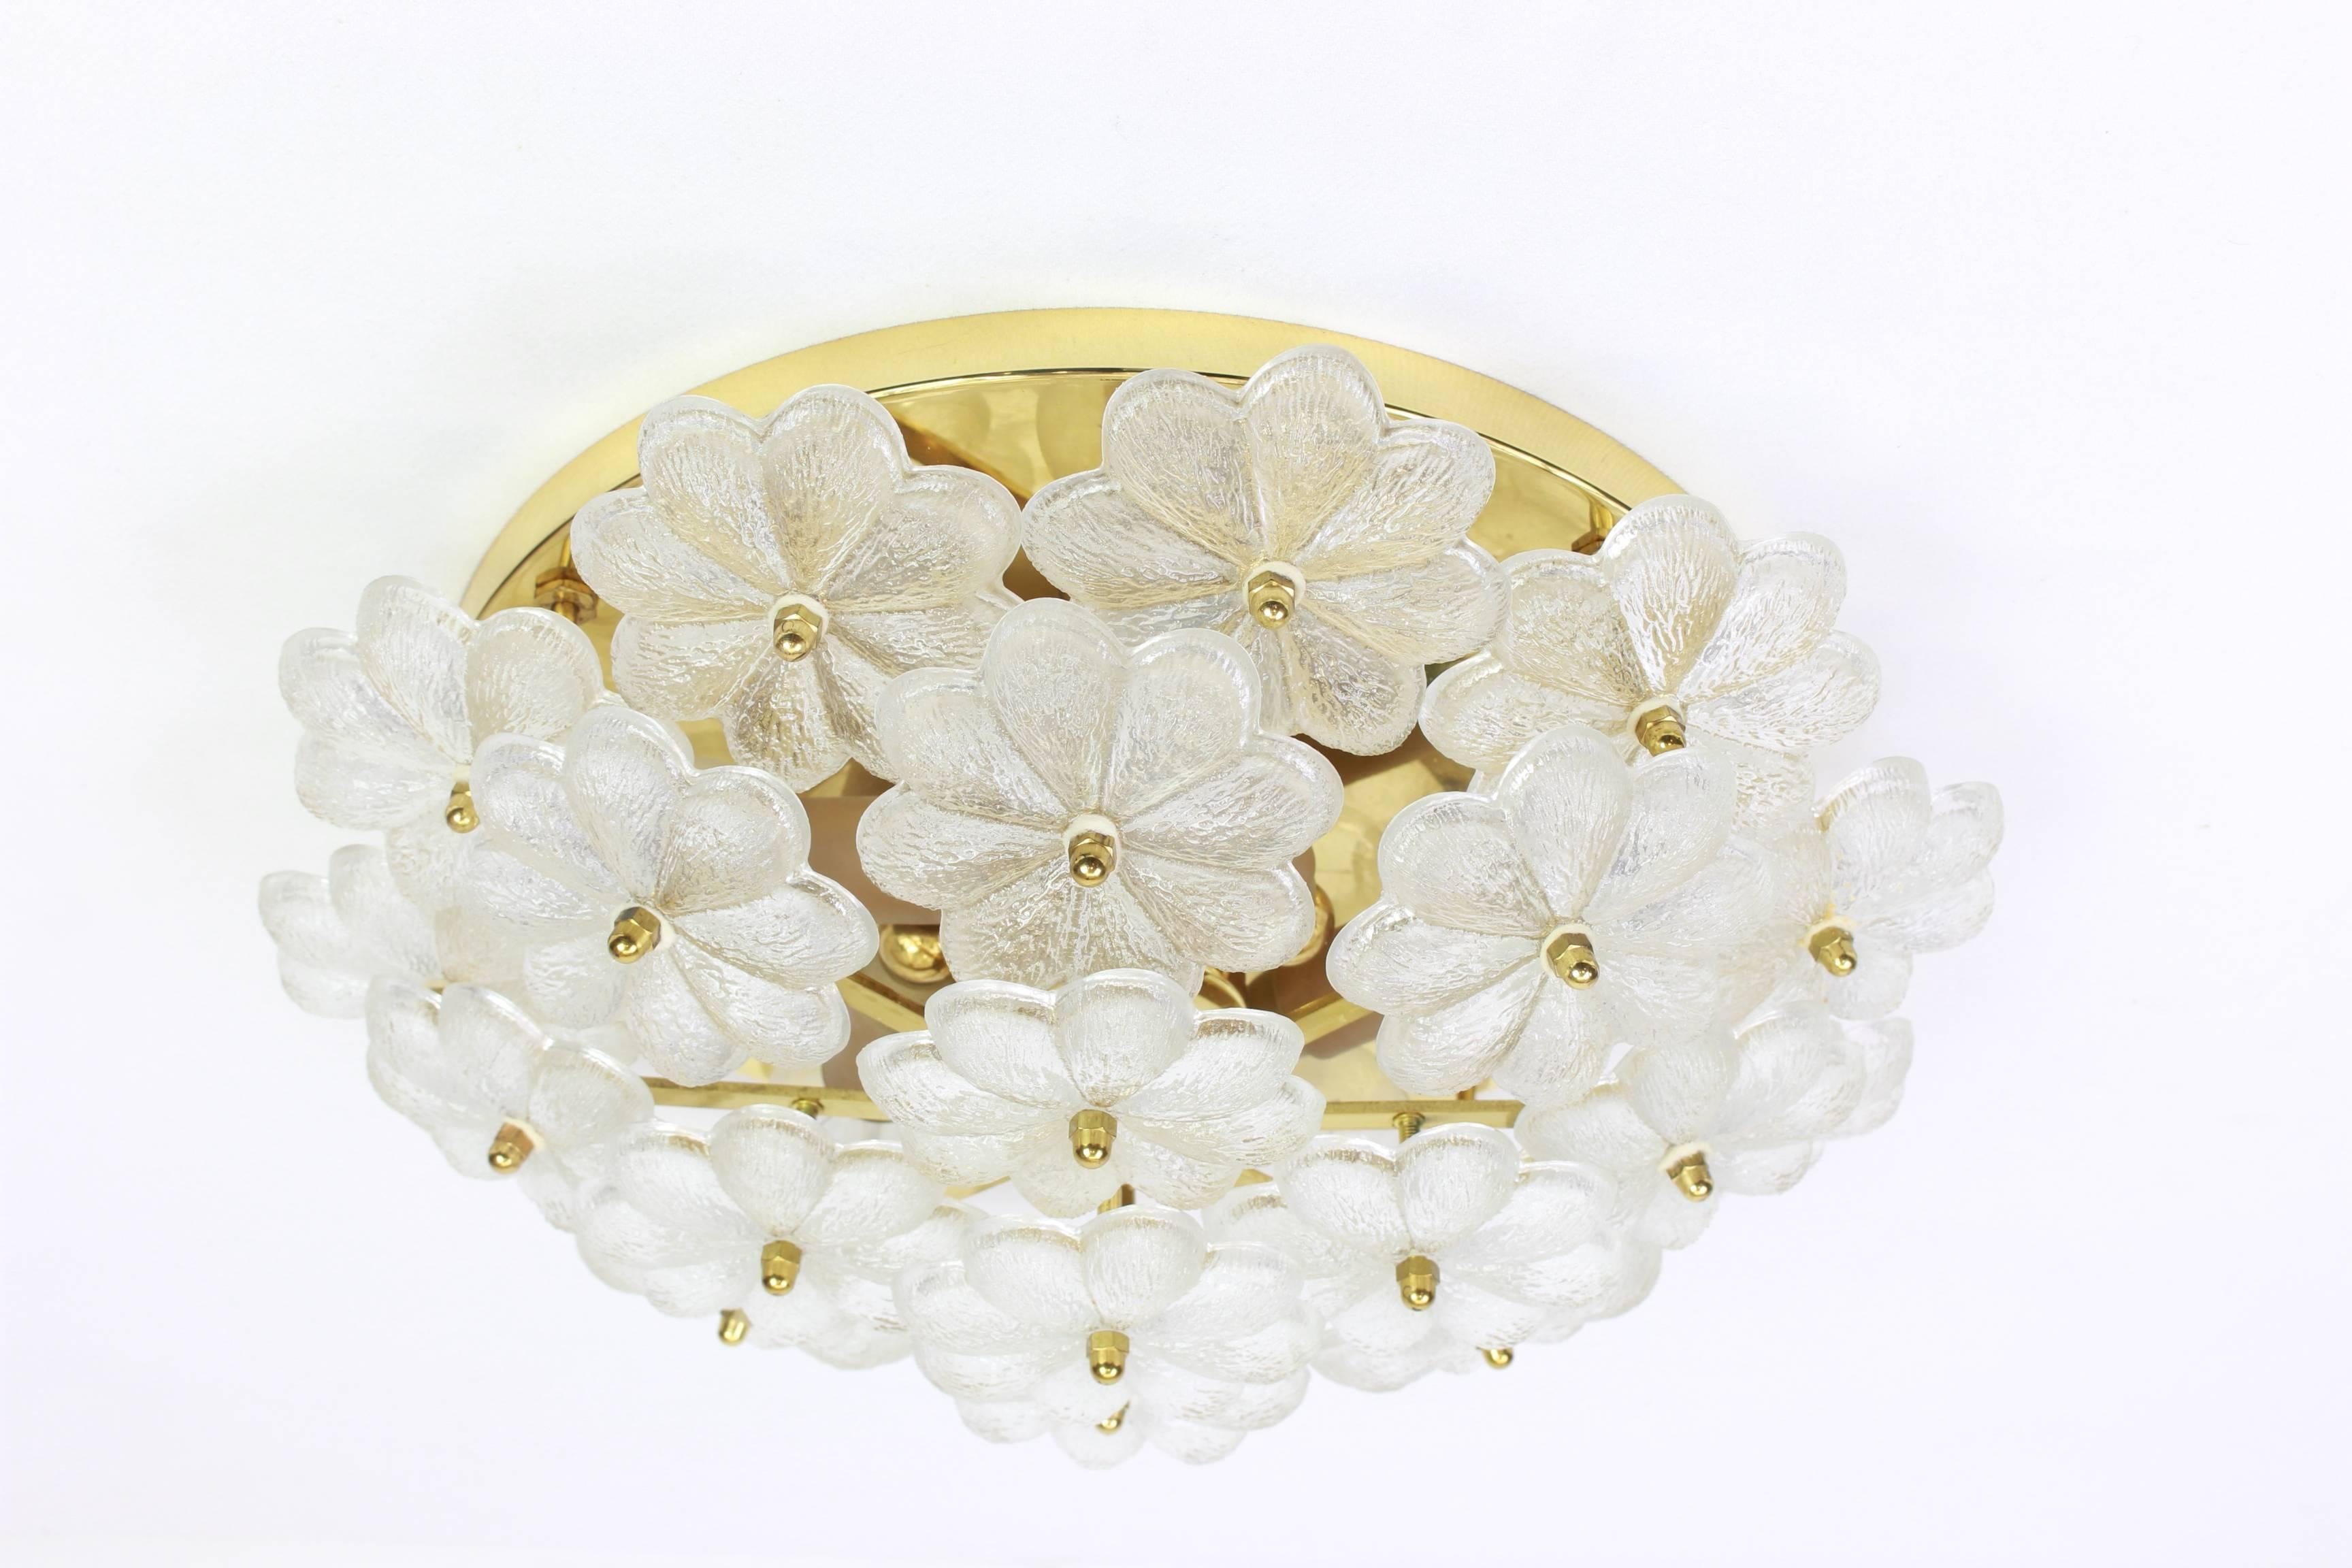 Midcentury flush mount light or Wall sconce with 24 Murano glass flowers over a polished brass base, made by Ernst Palme in Germany, 1970s

High quality and in very good condition. Cleaned, well-wired and ready to use. 

The fixture requires 5 x E14